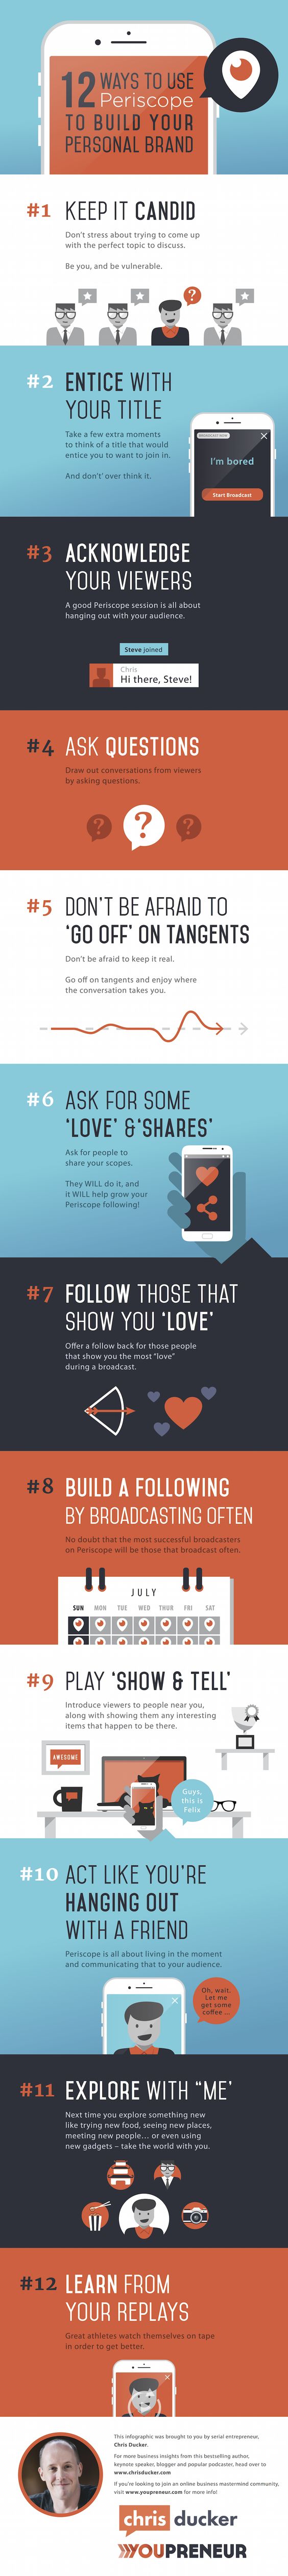 12 ways to use PERISCOPE to build your personal brand by @Chris Ducker.  He's great person to follow